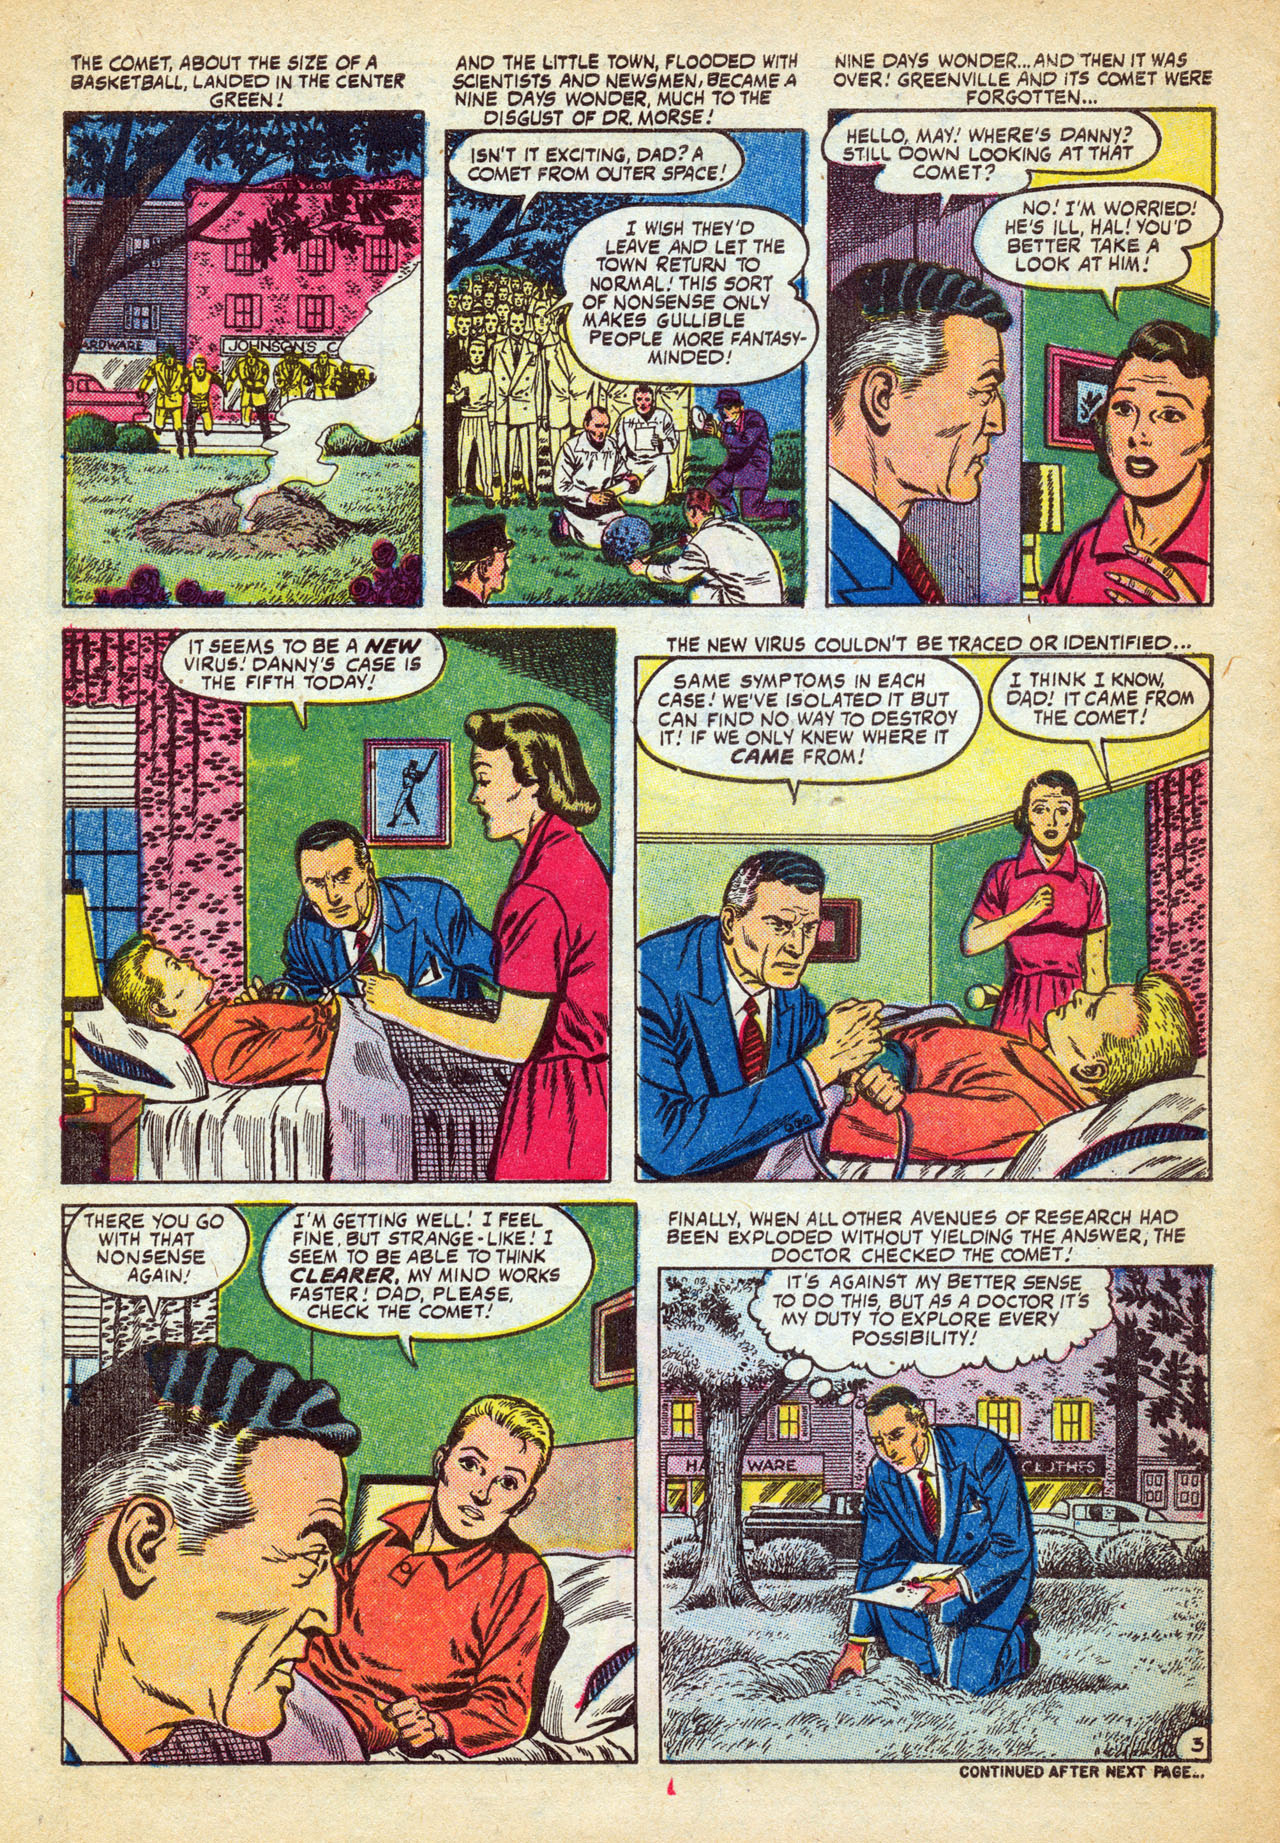 Marvel Tales (1949) 144 Page 9